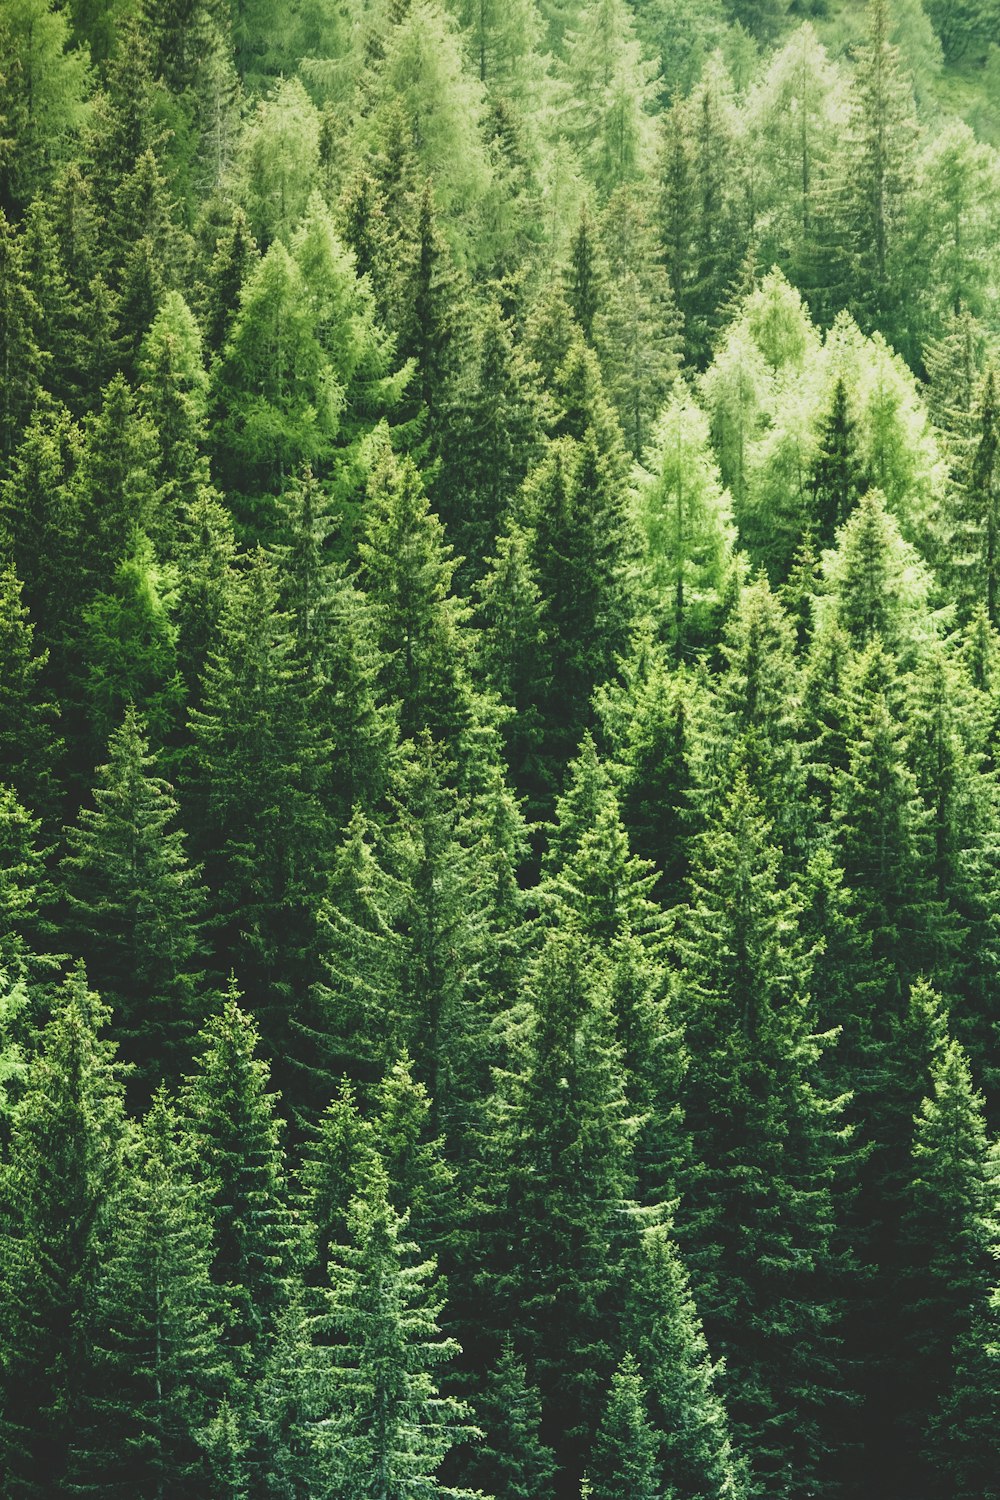 Green pine trees in forrest photo – Free Wallpapers Image on Unsplash